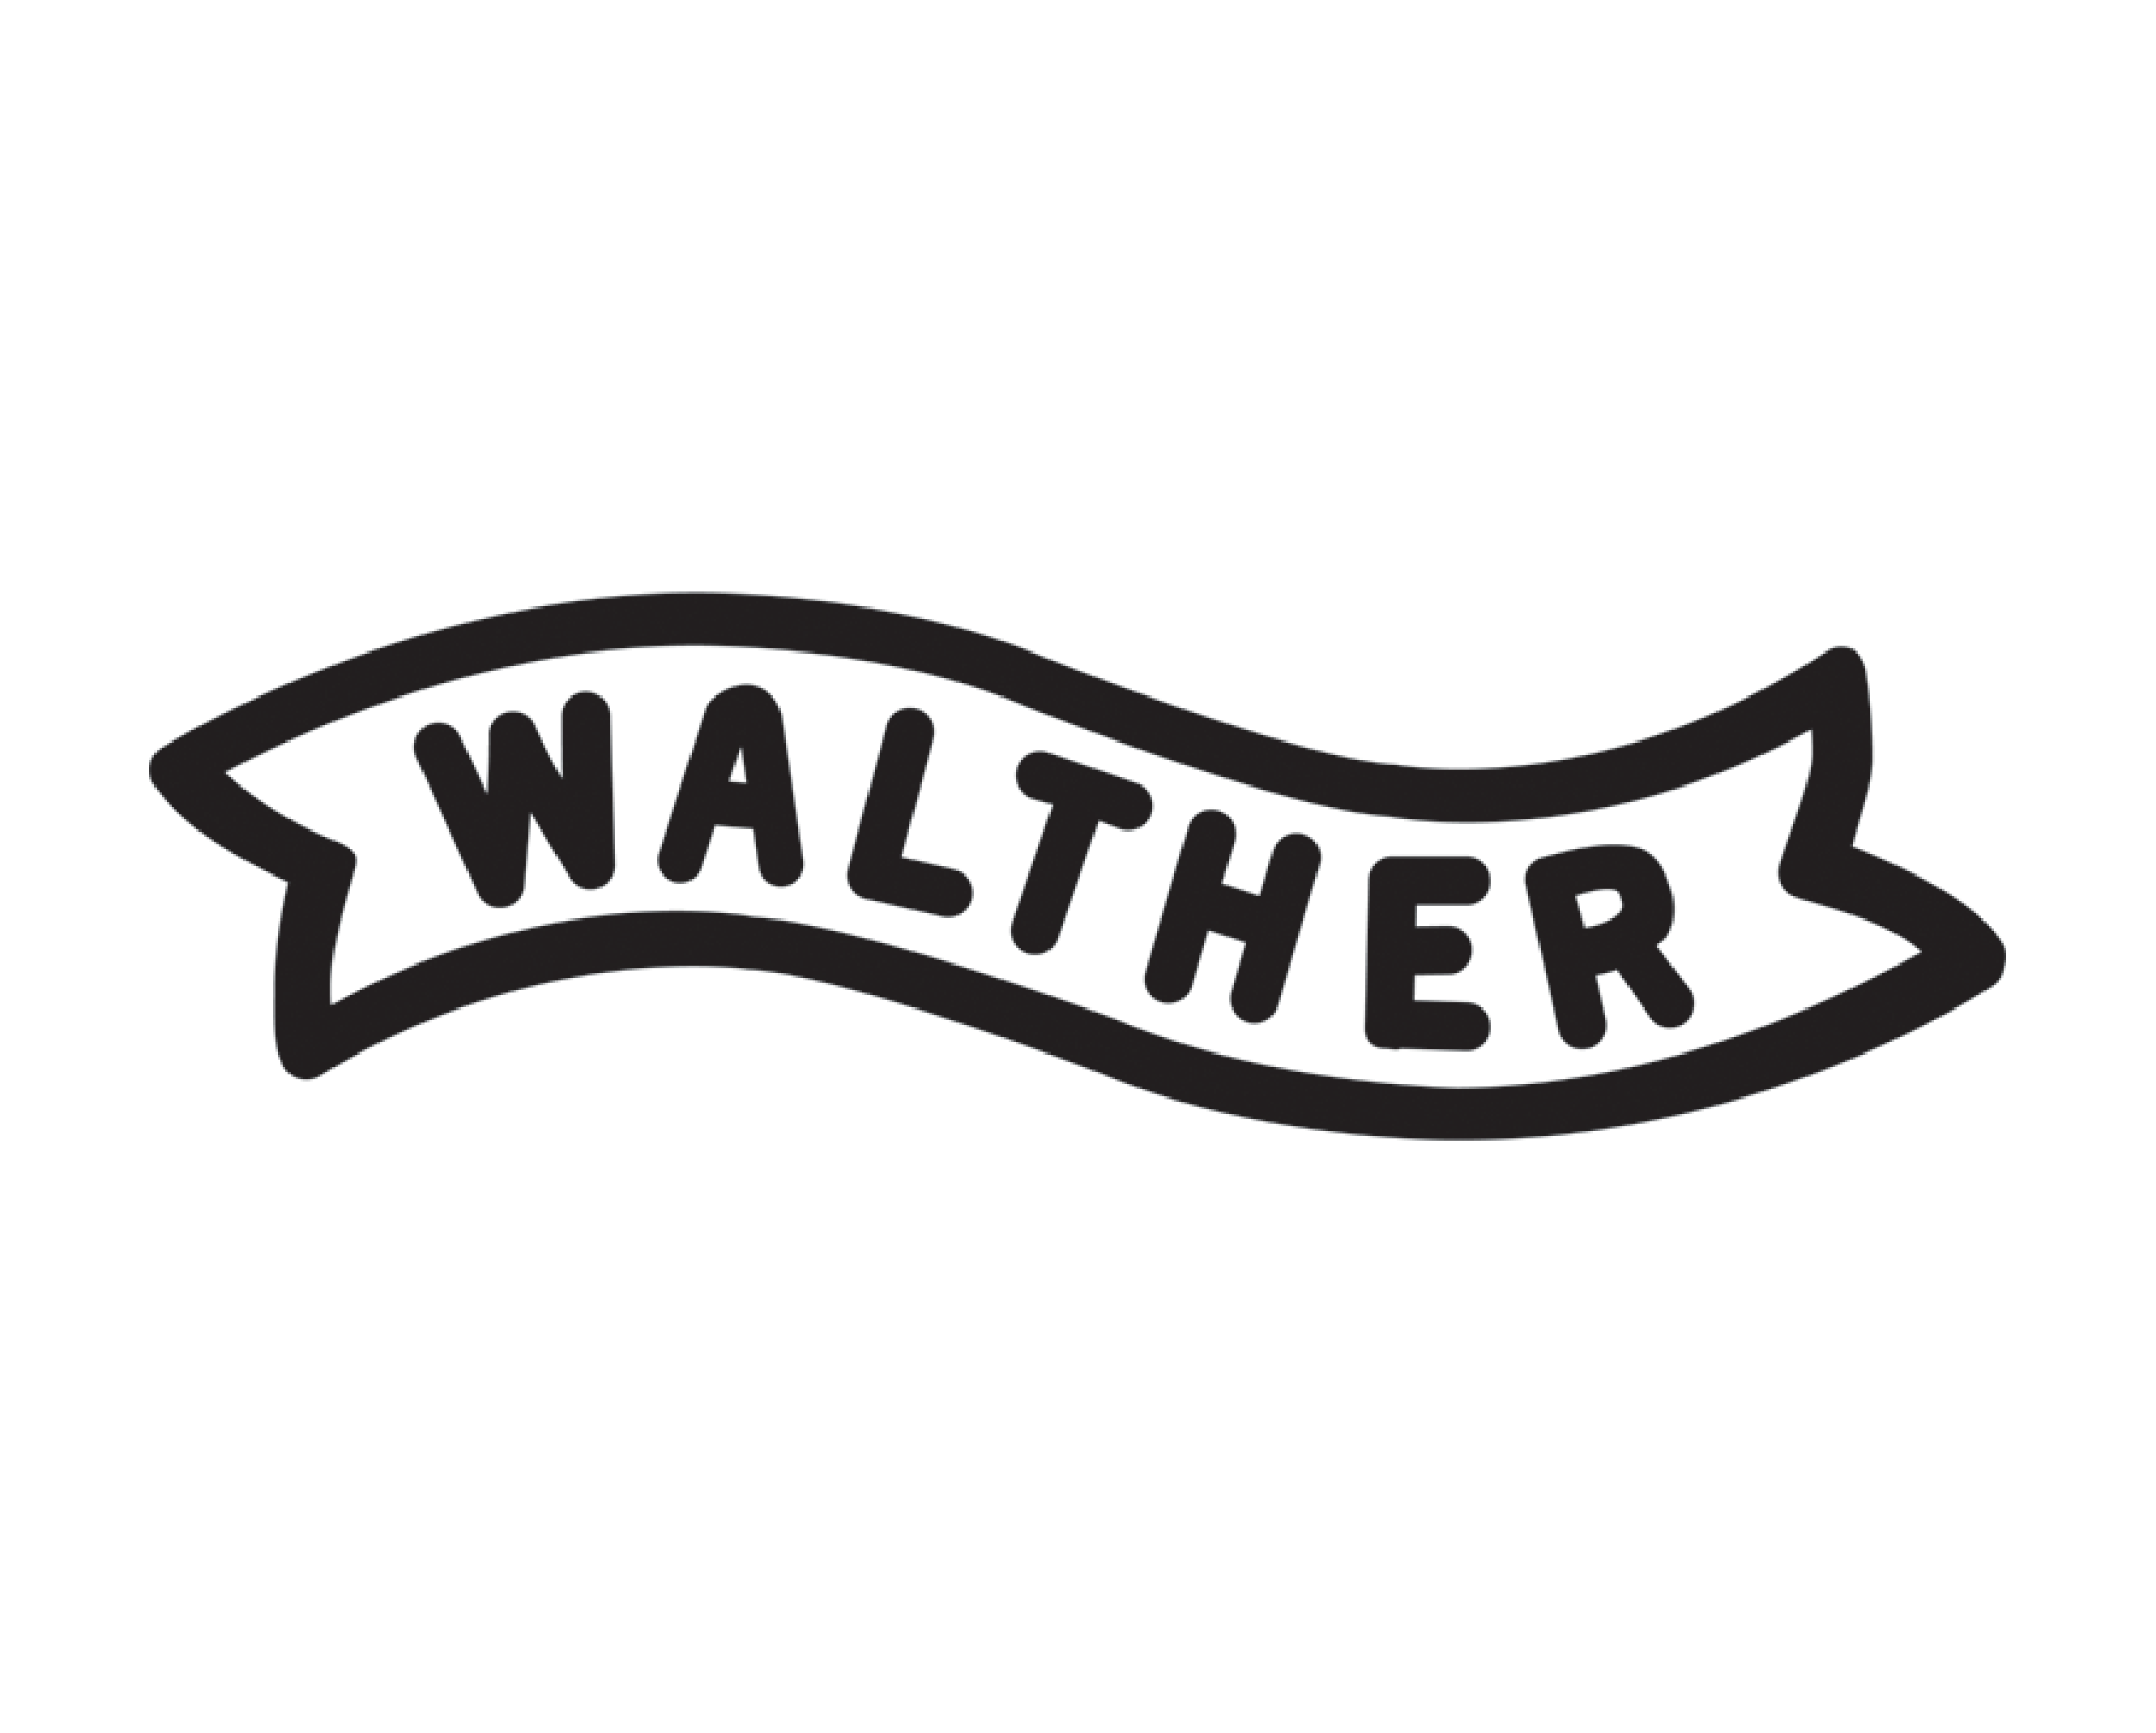 //centre-tir.ch/wp-content/uploads/2017/10/Walther_Logo.png